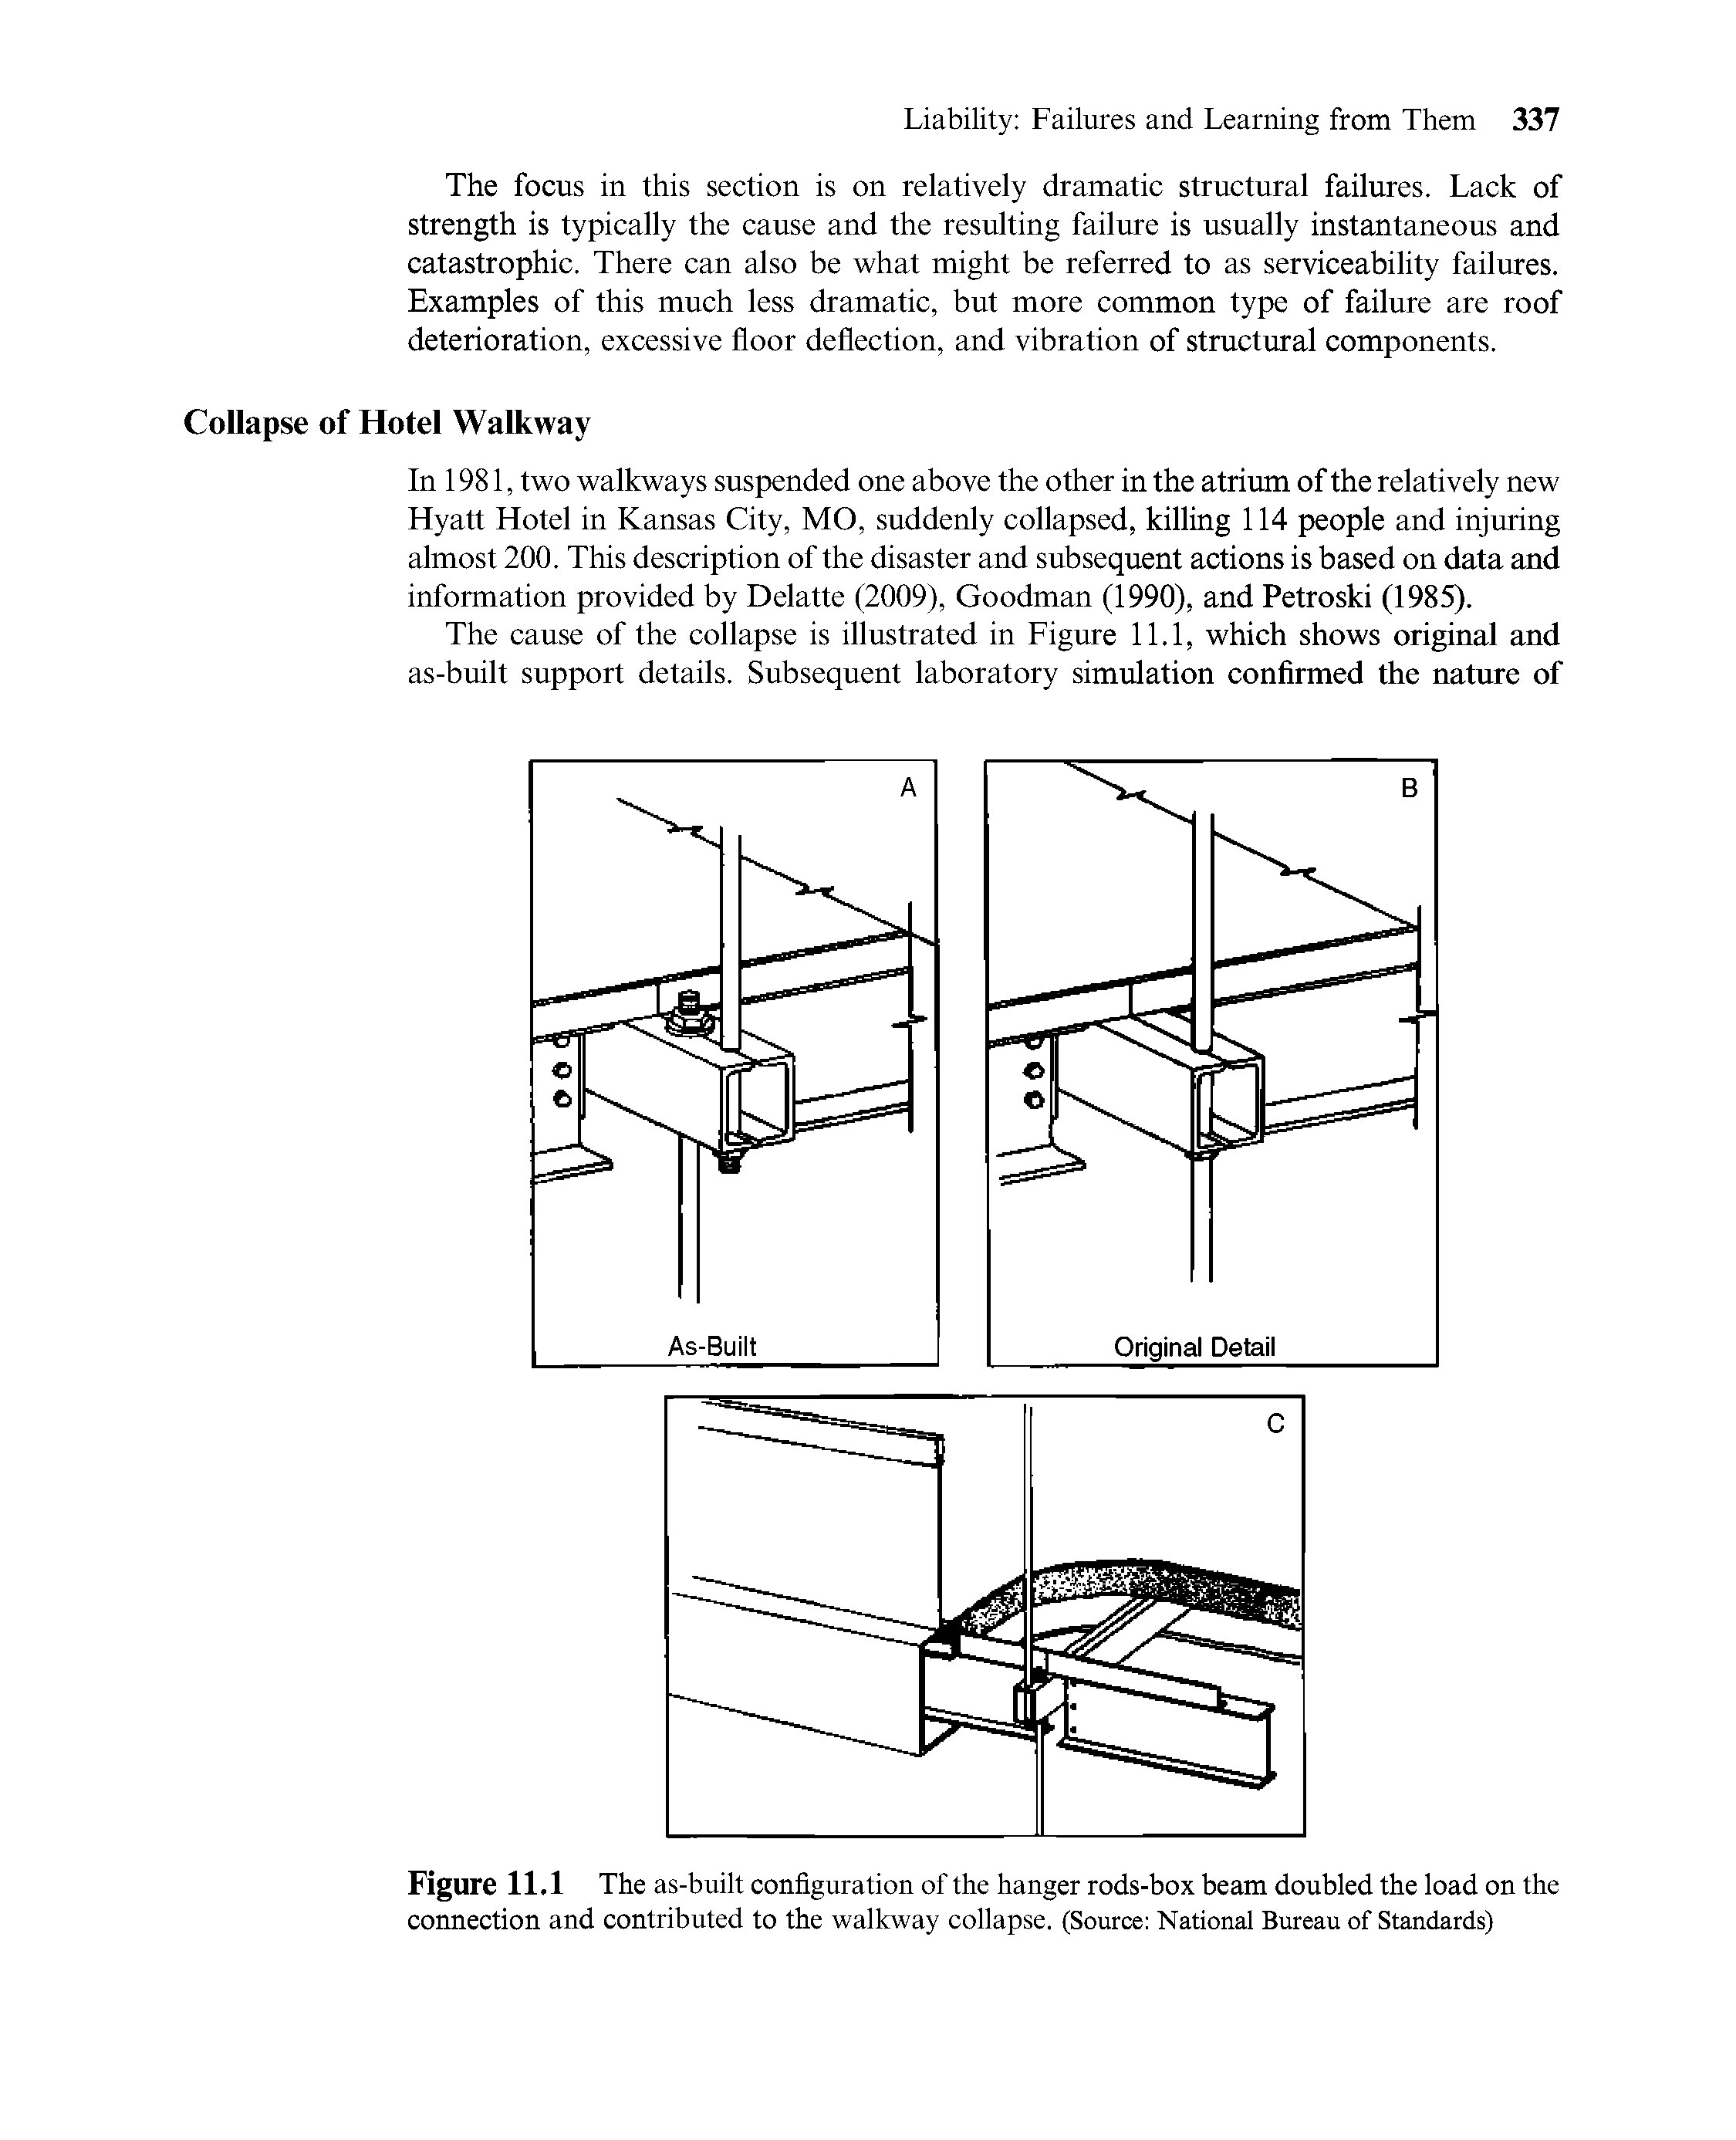 Figure 11.1 The as-built configuration of the hanger rods-box beam doubled the load on the connection and contributed to the walkway collapse. (Source National Bureau of Standards)...